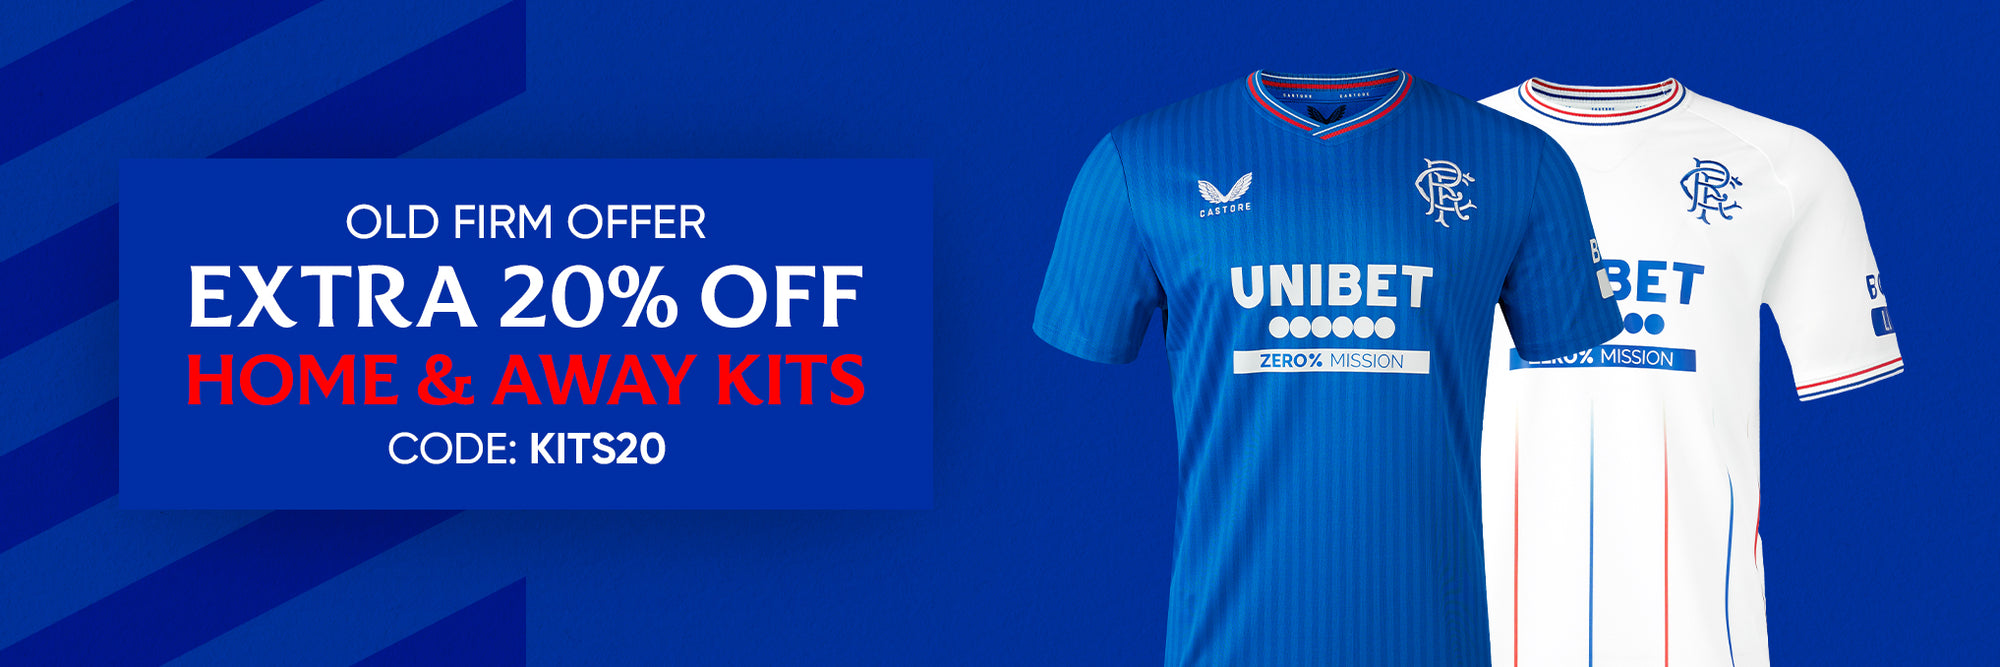 Old Firm Offer - Extra 20% Off Home & Away Kits